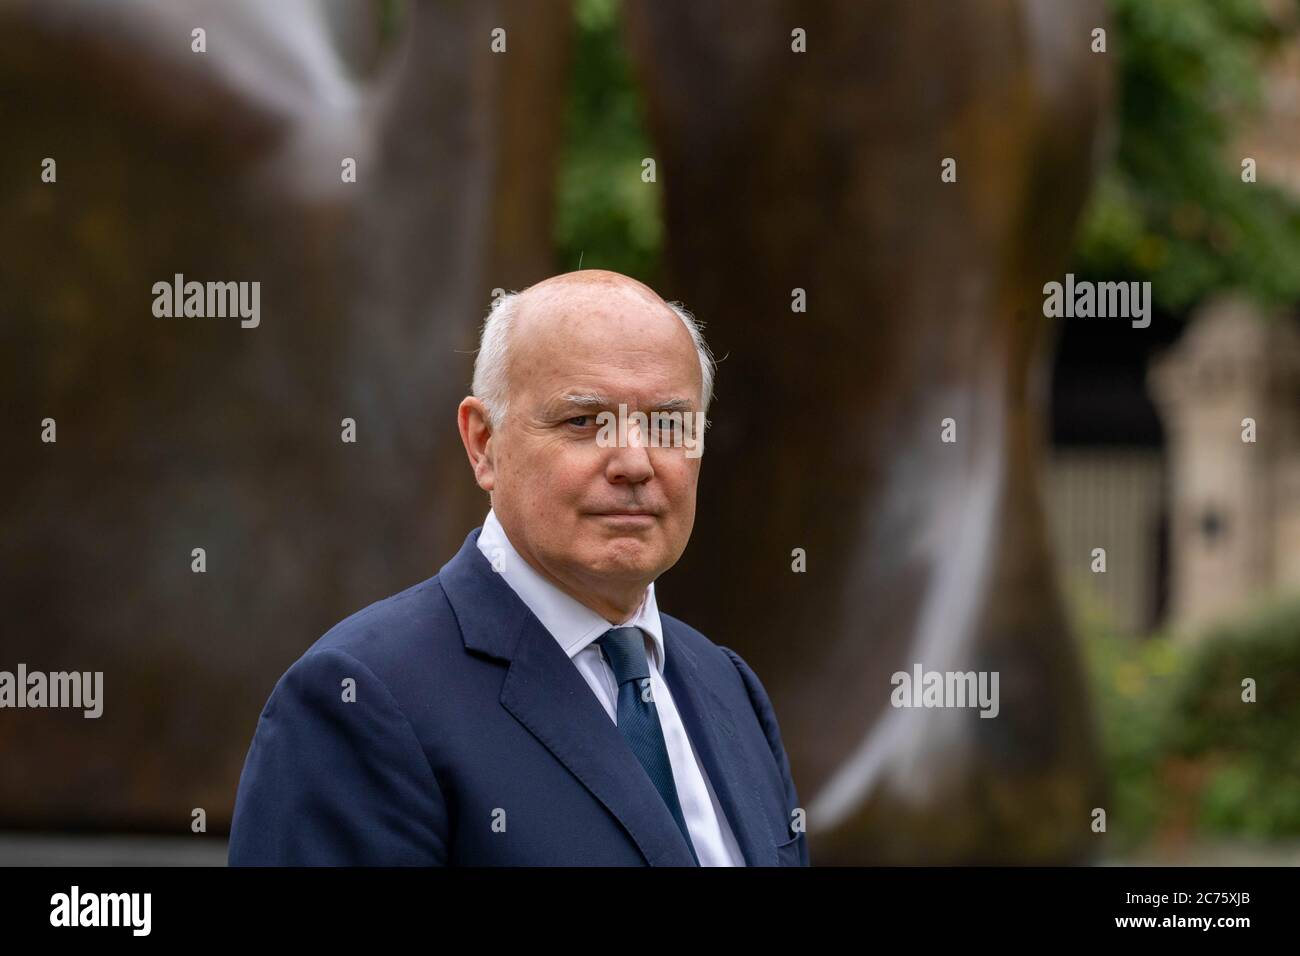 London, UK. 14th July, 2020. MP's in Westminster Iain Duncan Smith Conservative MP for Chingford and Woodford and former leader of the Conservative party. He is pictured on College Green Westminster giving an interview on the Huawei UK 5G ban Credit: Ian Davidson/Alamy Live News Stock Photo